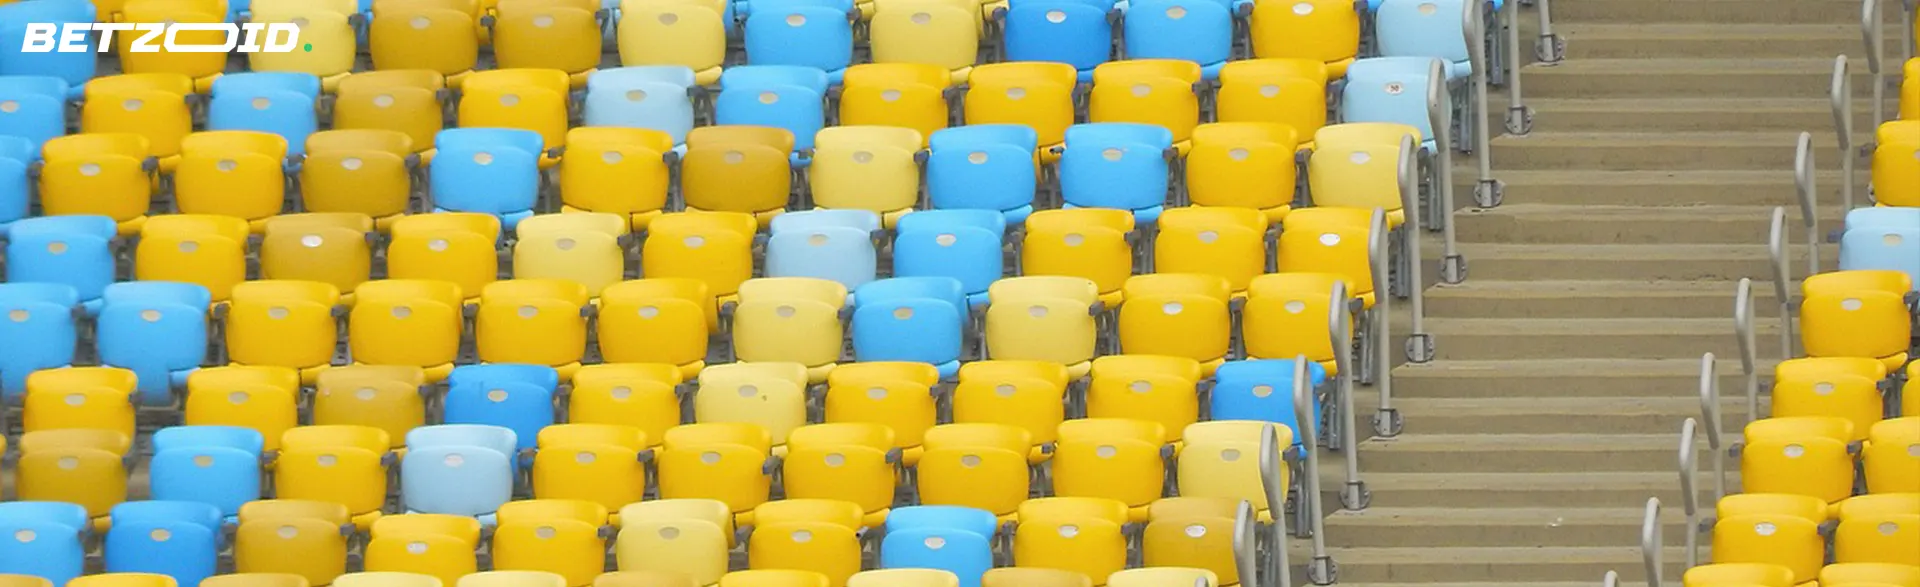 Empty sports stadium seats in blue and yellow.